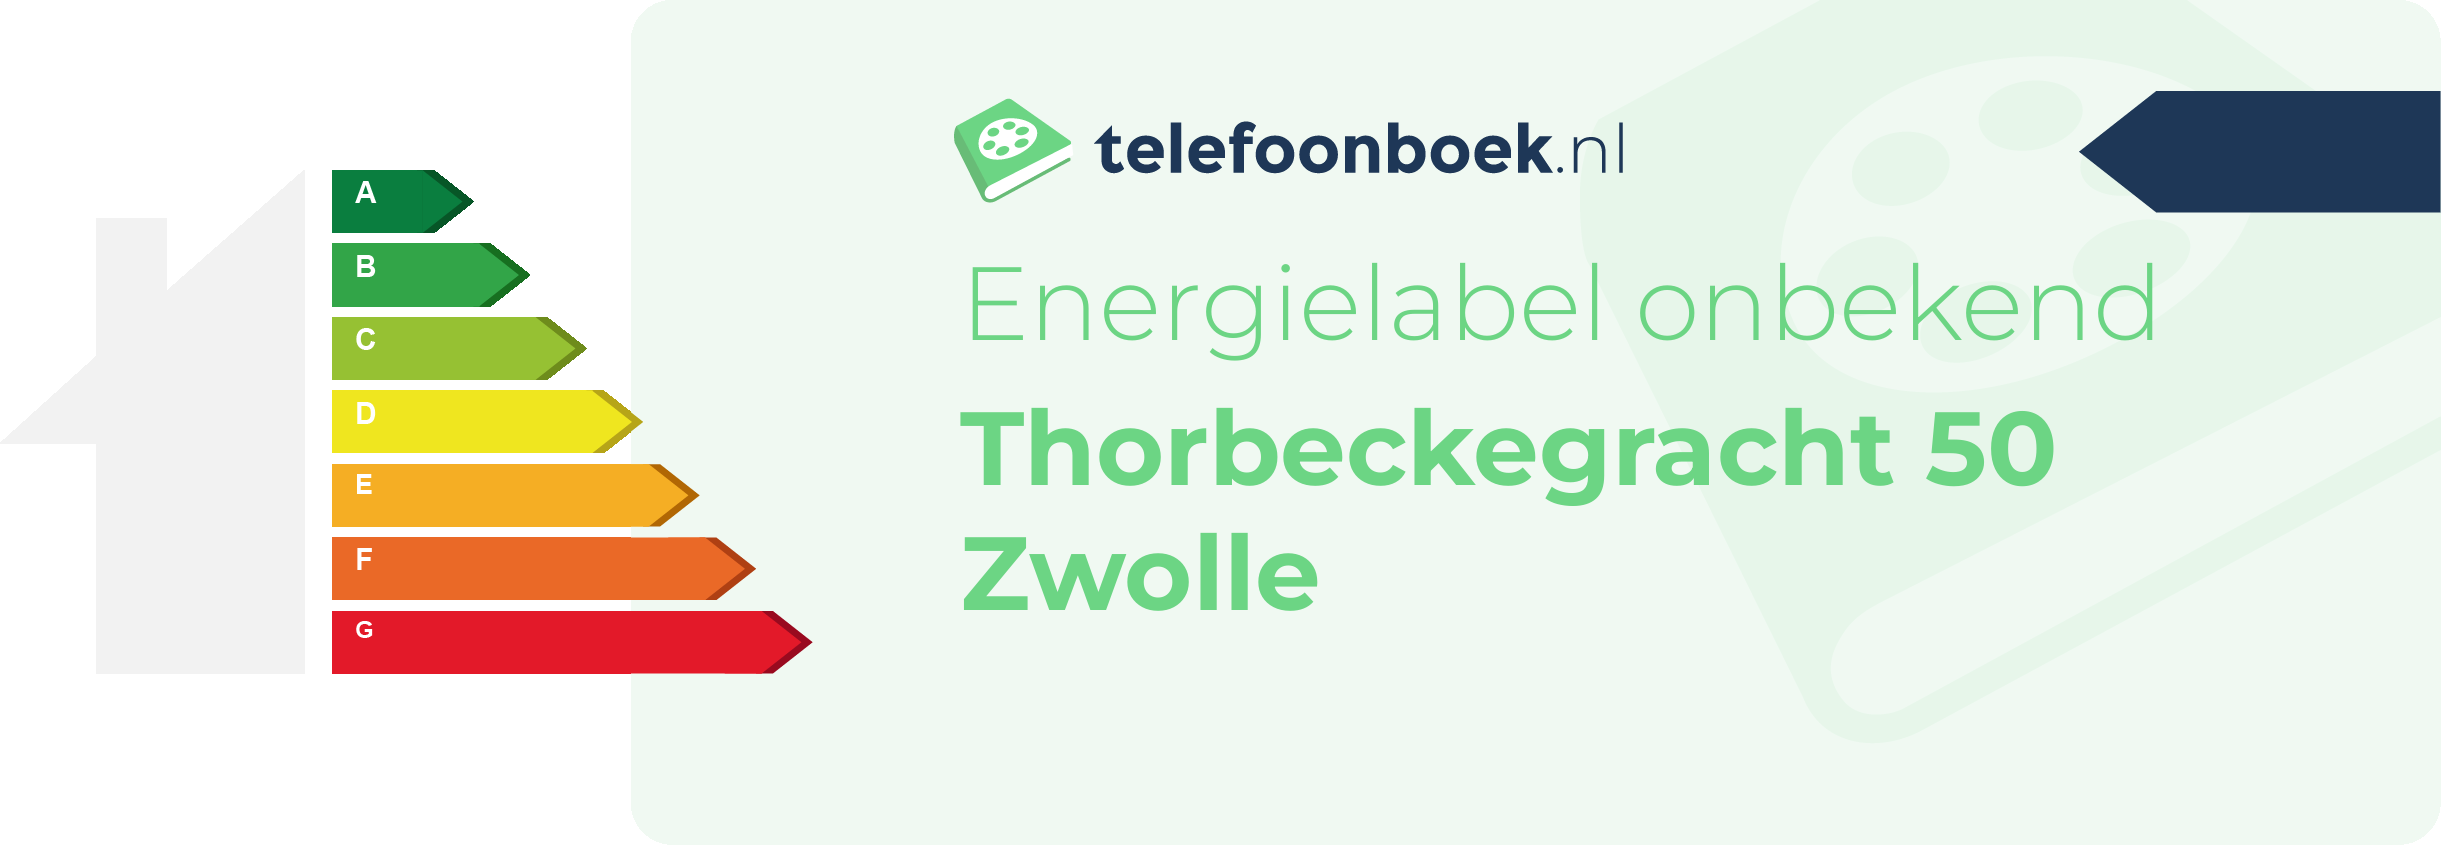 Energielabel Thorbeckegracht 50 Zwolle